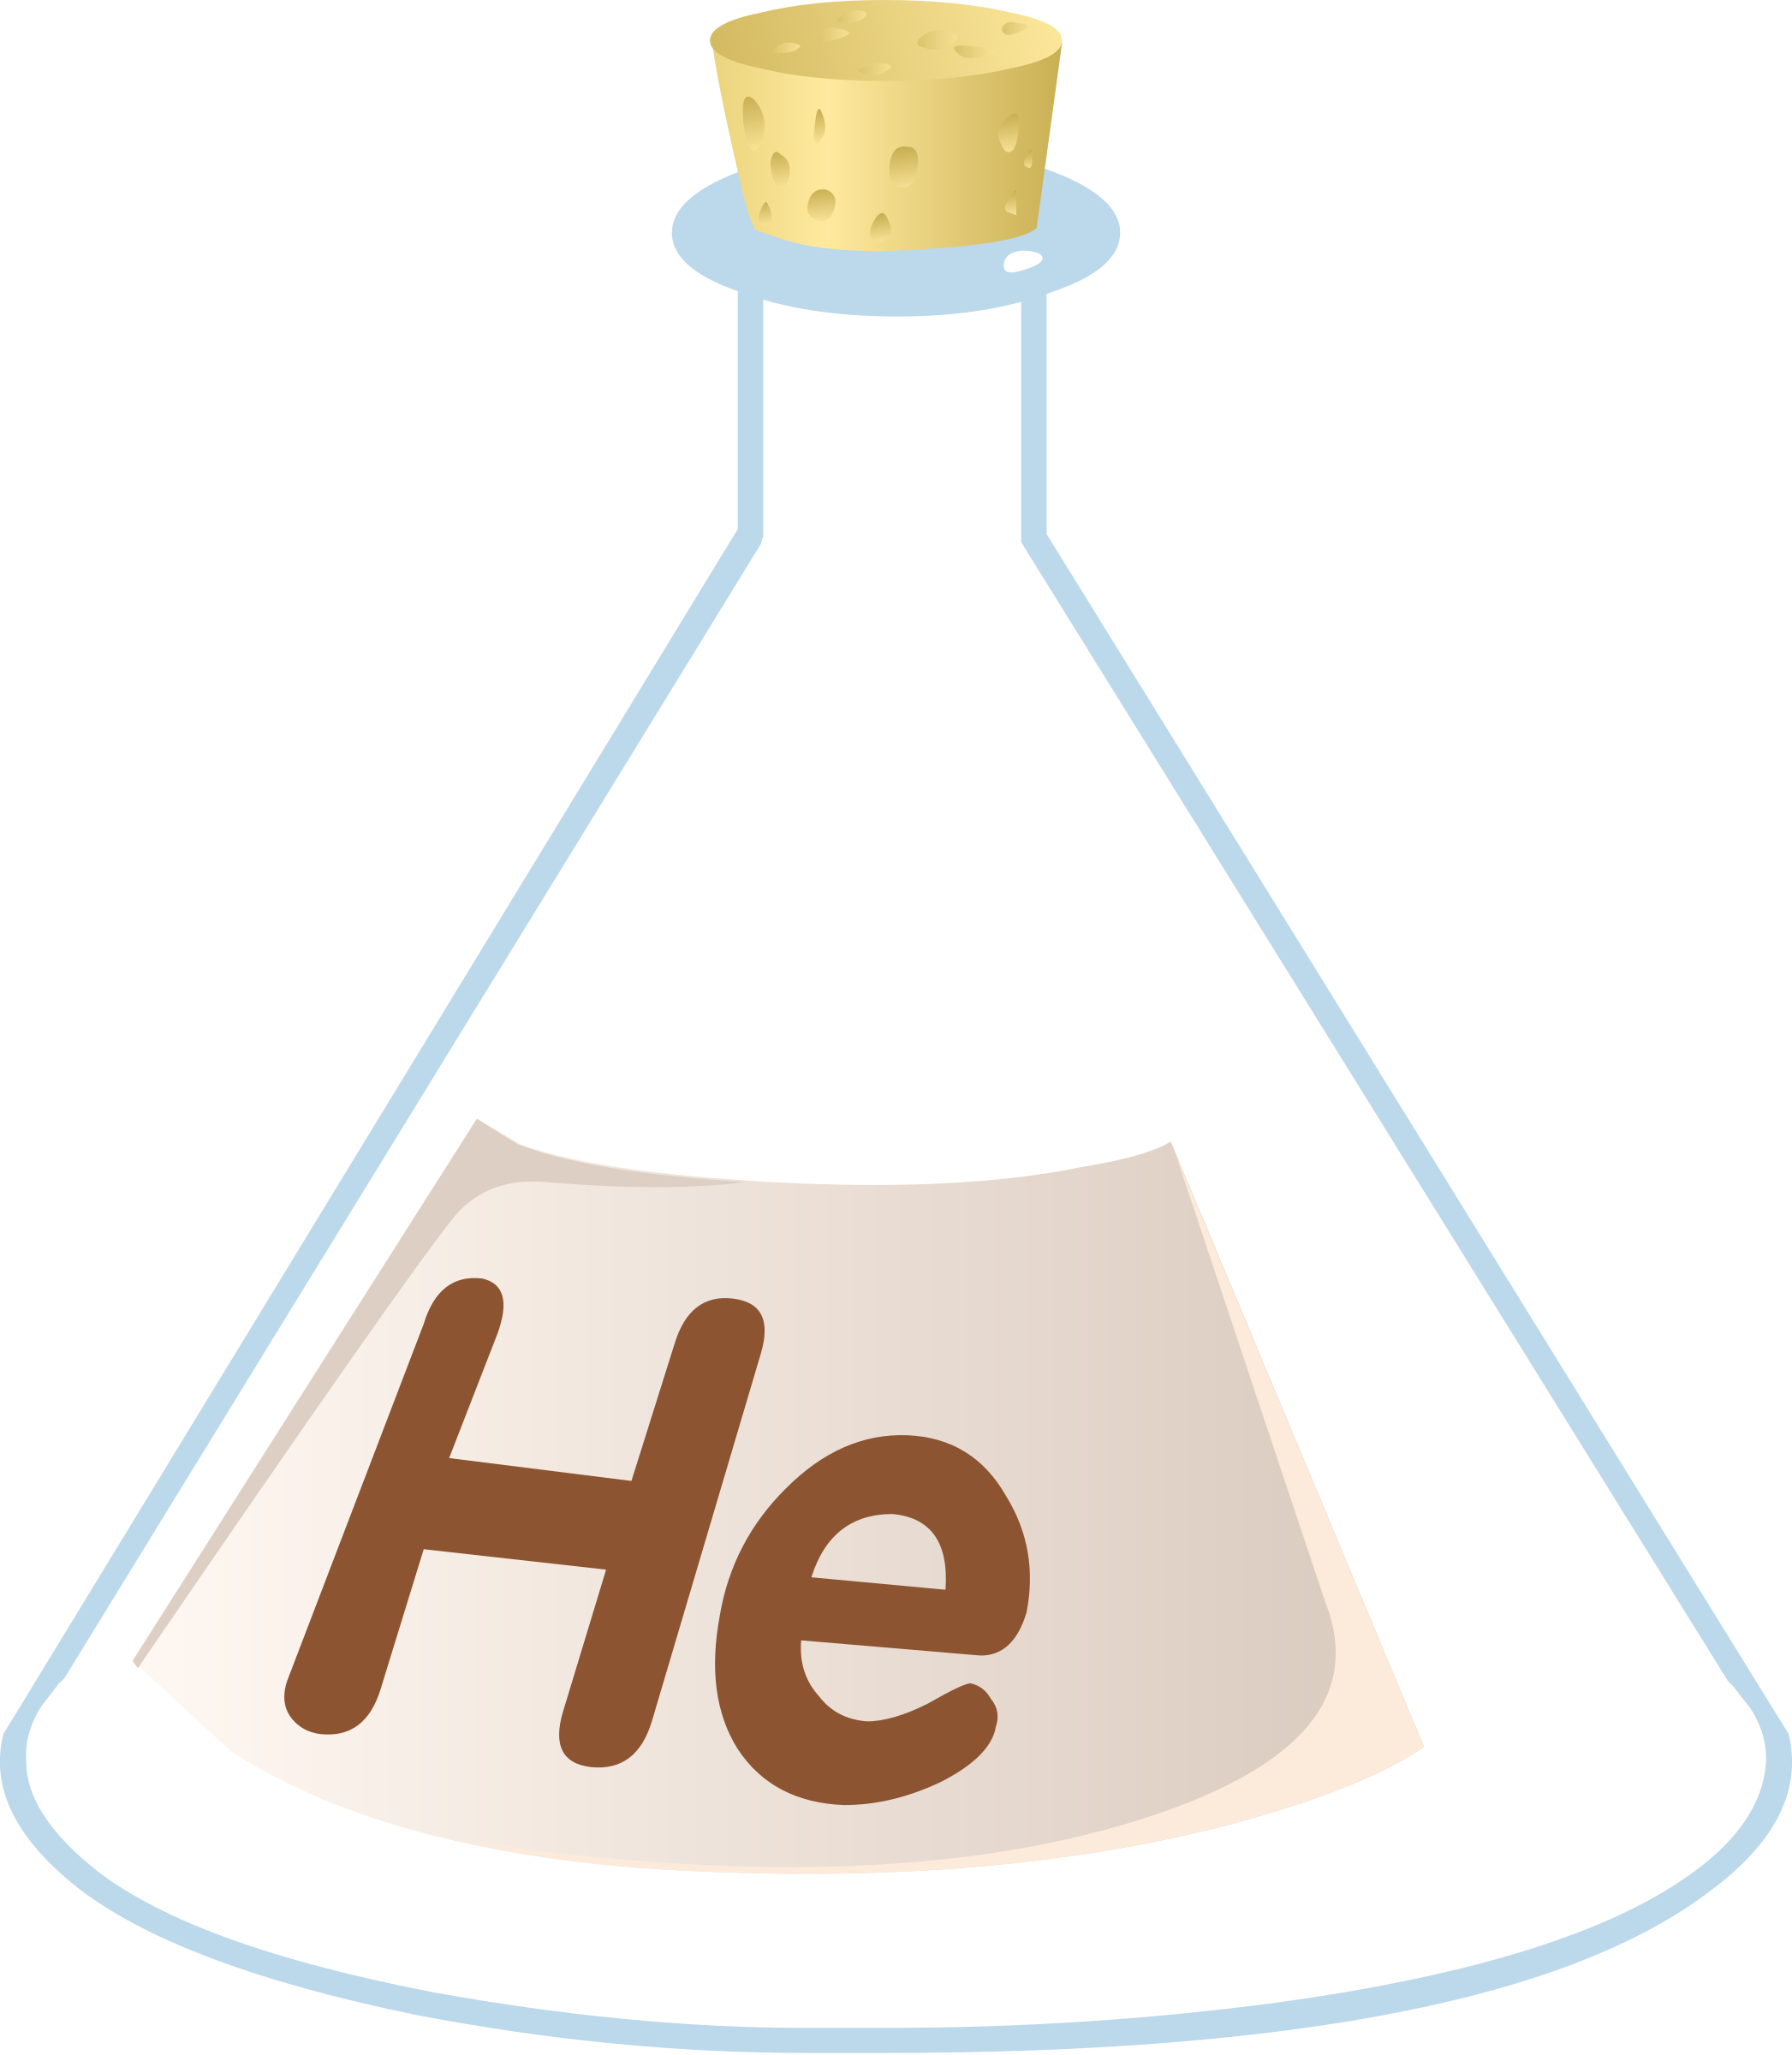 Misc Helium - More Information About Helium (2093x2400)